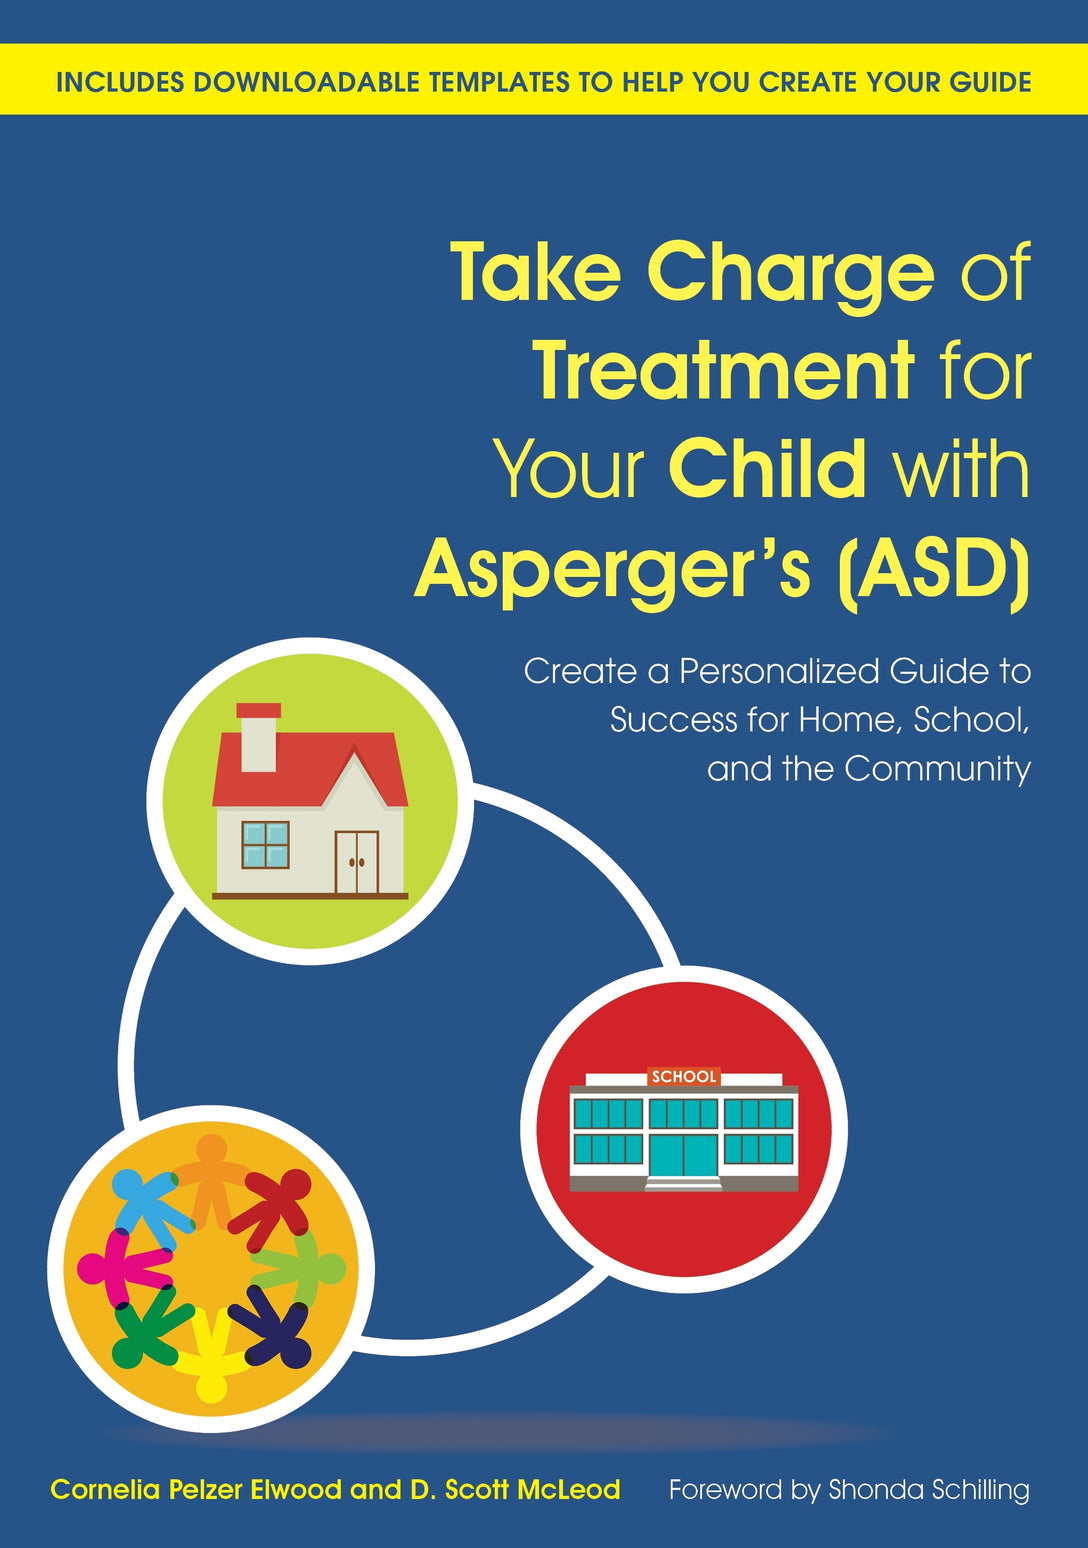 Take Charge of Treatment for Your Child with Asperger's (ASD) by Shonda Schilling, Cornelia Pelzer Elwood, D. Scott McLeod